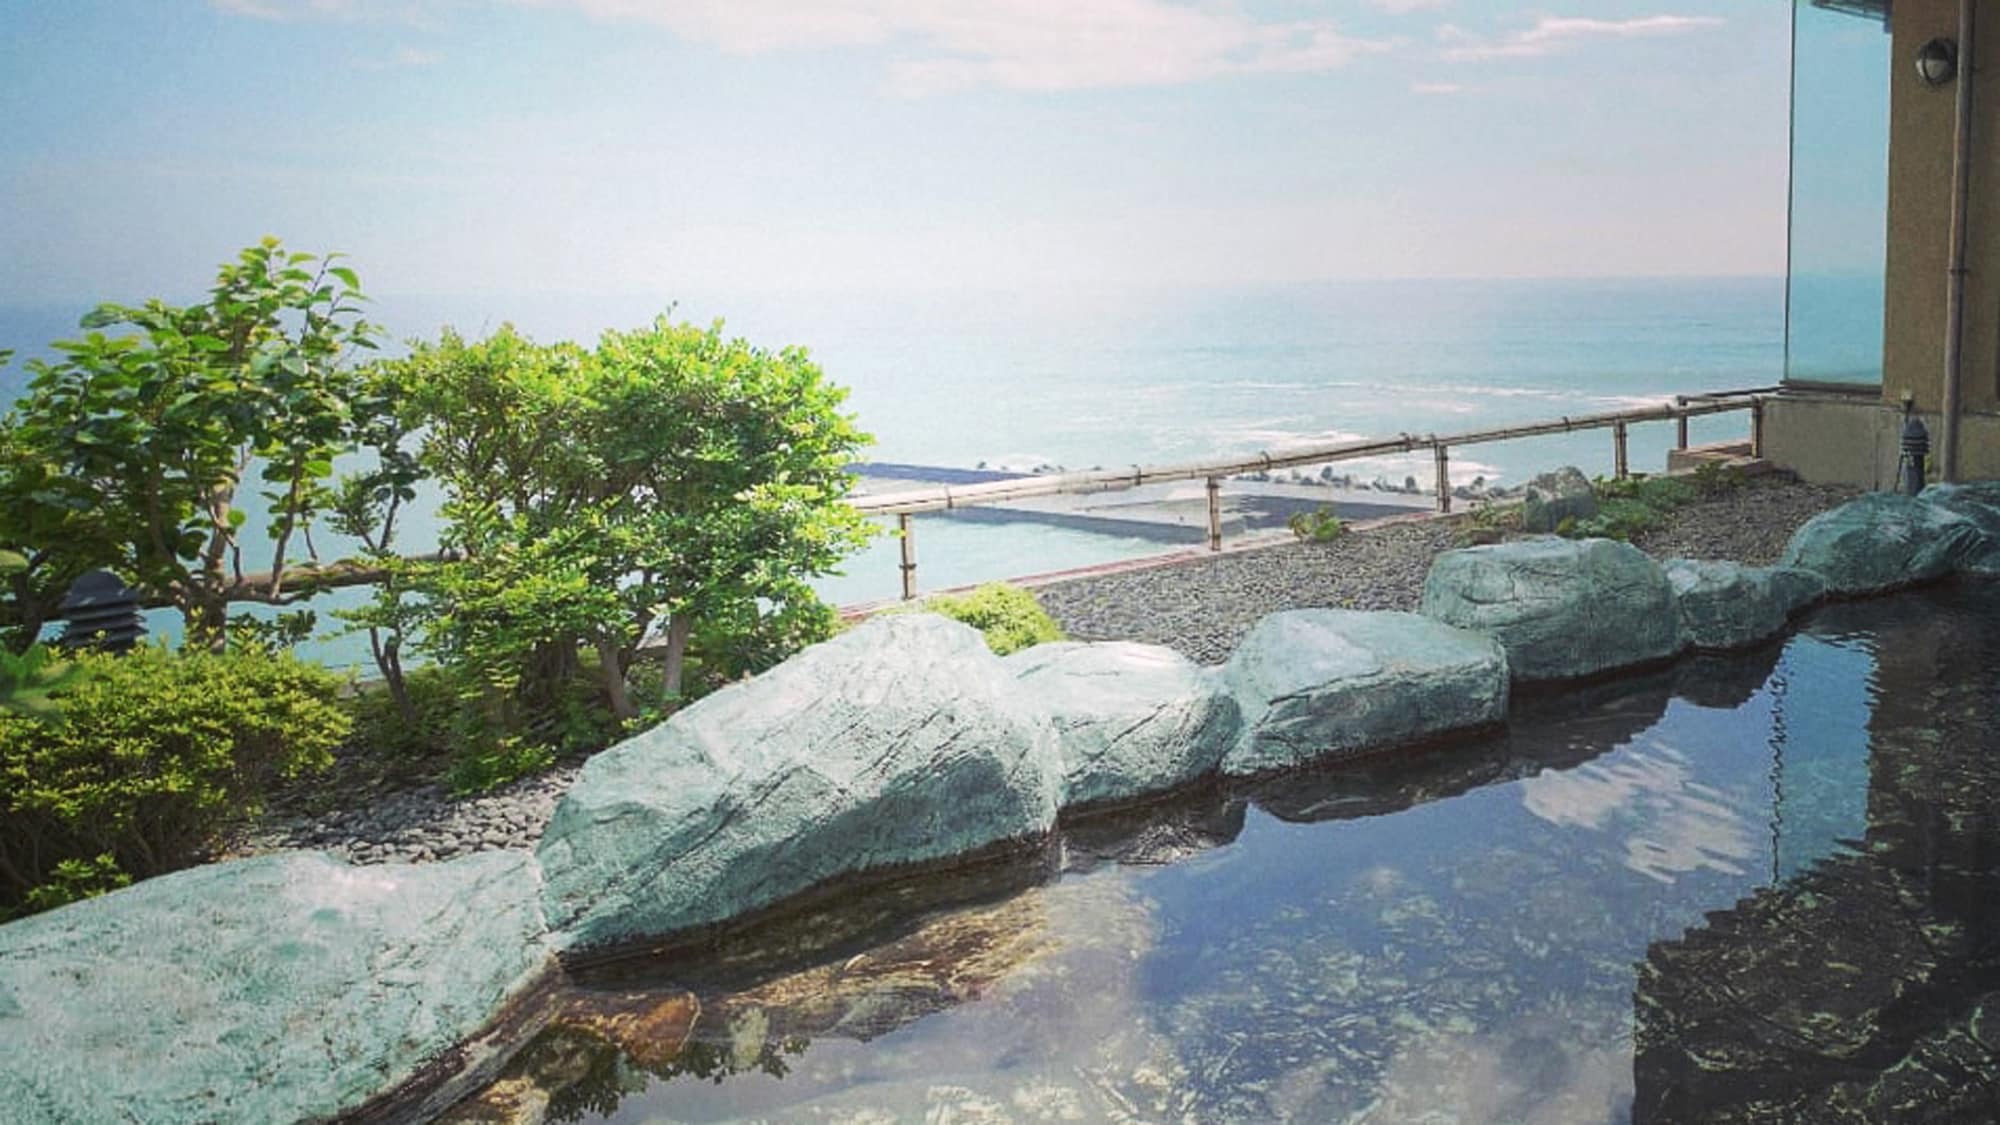 A hot spring from a private source, an open-air bath for men, "Aoi" of Shikainami